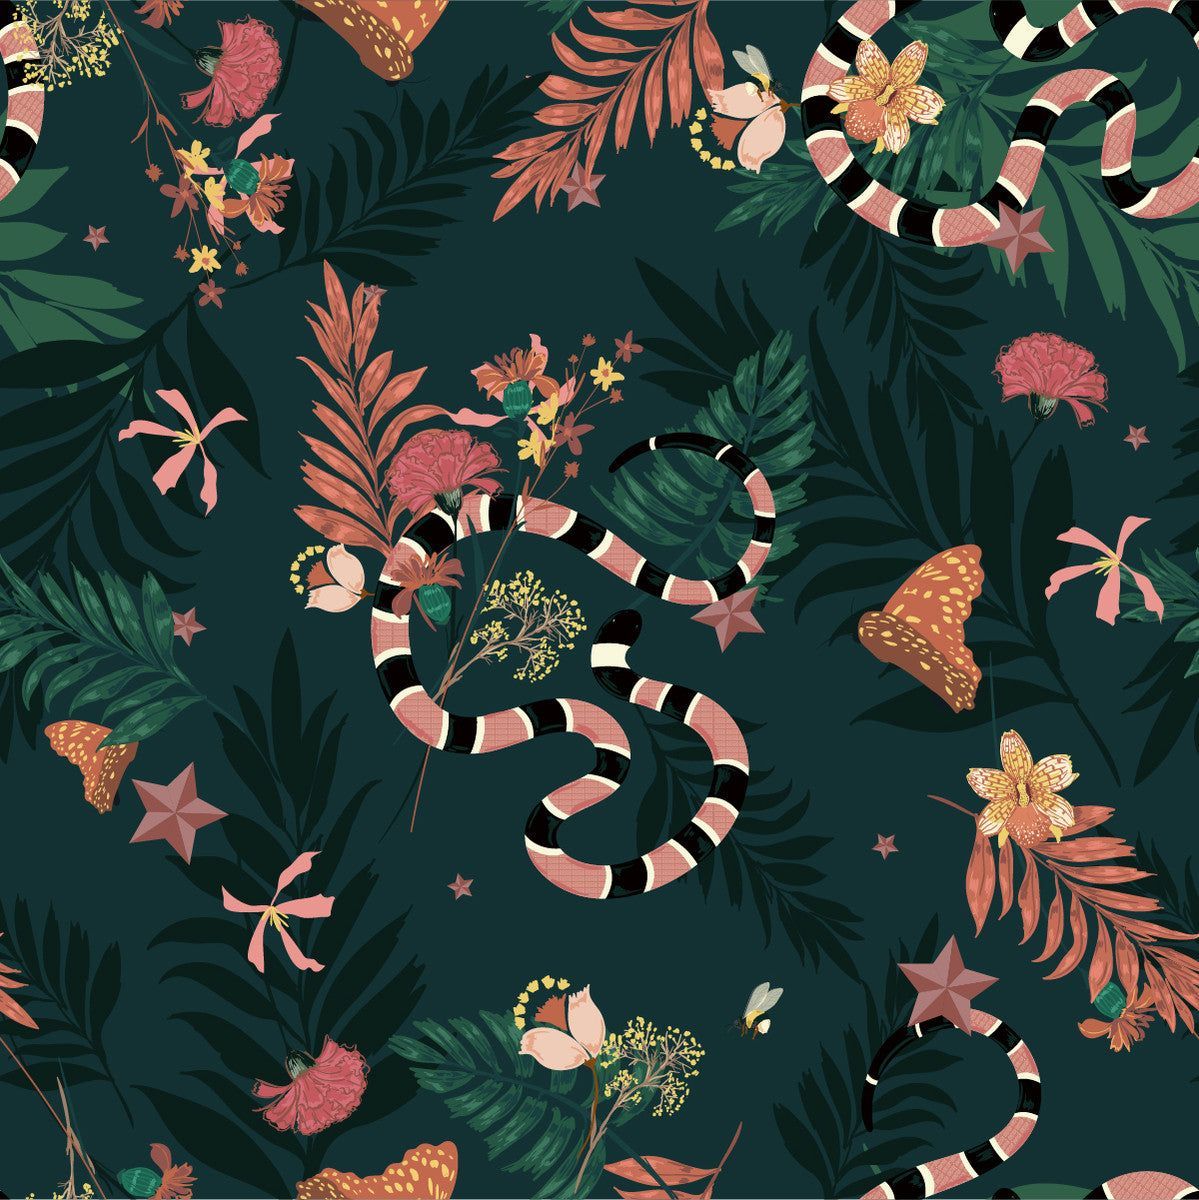 A snake and flowers on a dark green background - Jungle